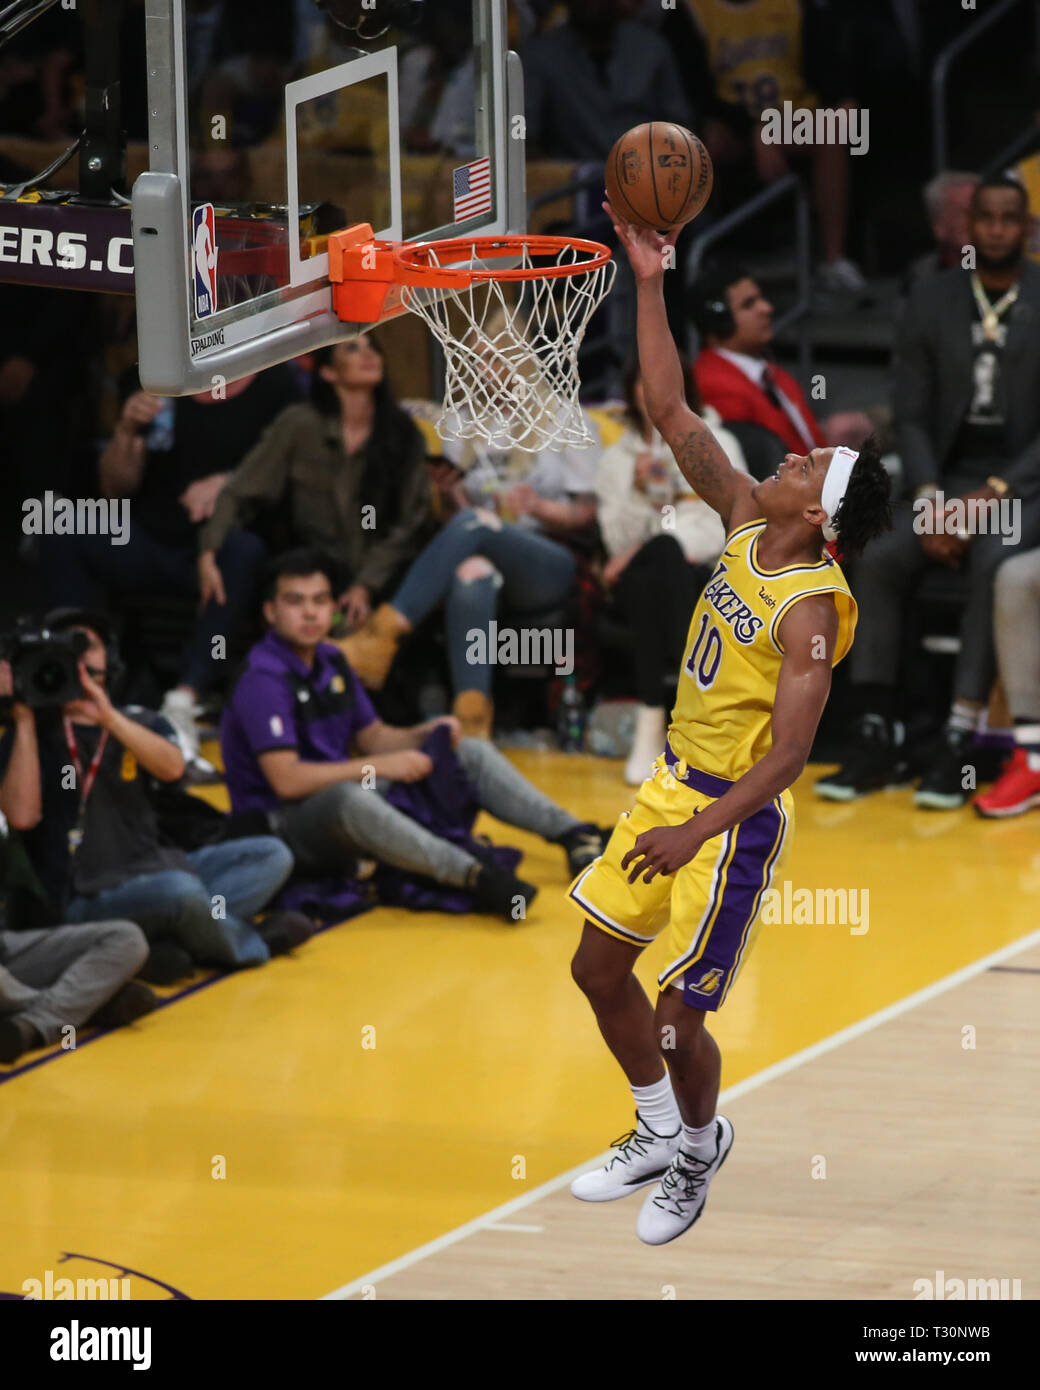 Los Angeles, California, USA. 04th Apr, 2019. Los Angeles Lakers forward Jemerrio Jones #10 during the Golden State Warriors vs Los Angeles Lakers game at Staples Center in Los Angeles, CA. on April 4, 2019. (Photo by Jevone Moore) Credit: Cal Sport Media/Alamy Live News Stock Photo